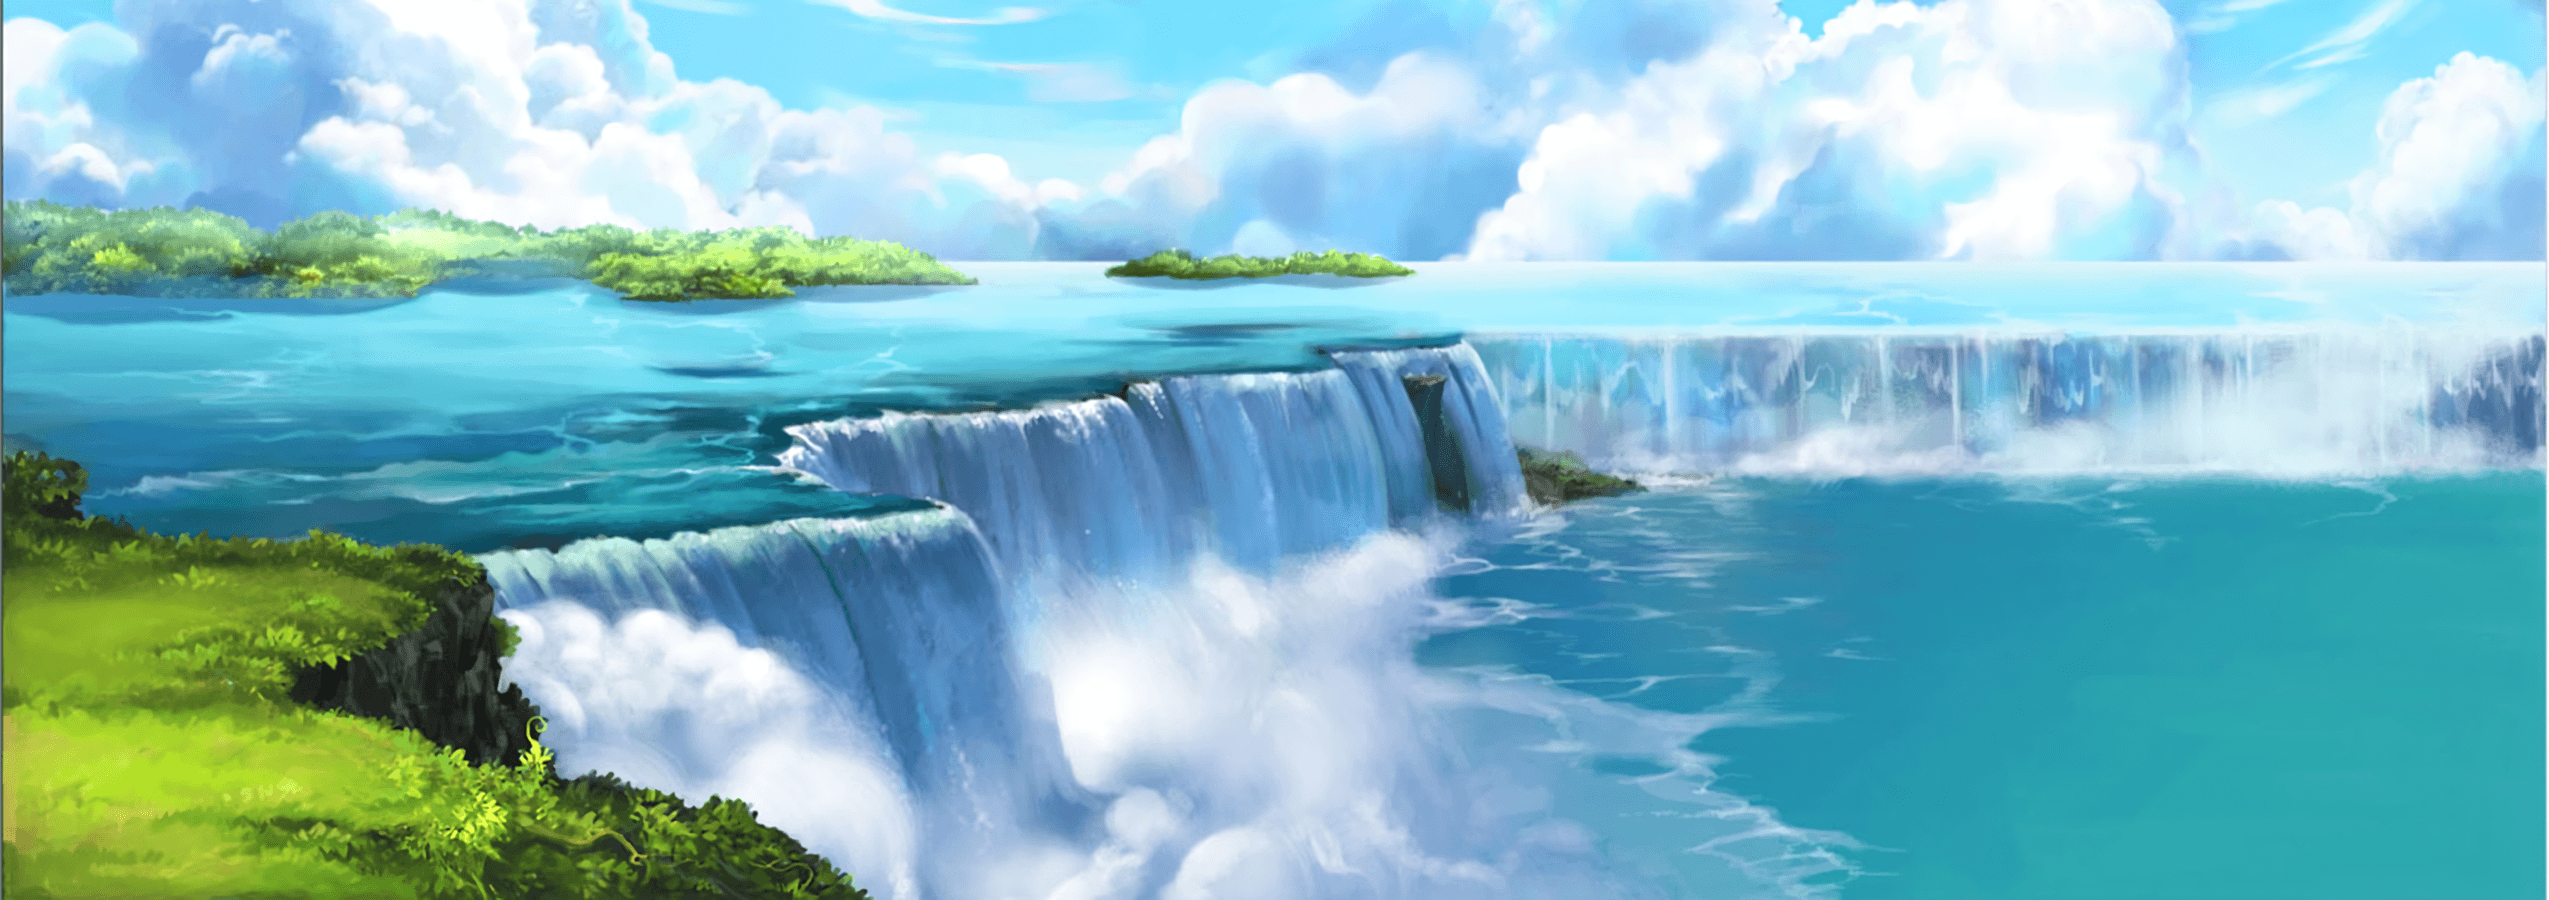 Anime Falls Wallpaper and Background Imagex900